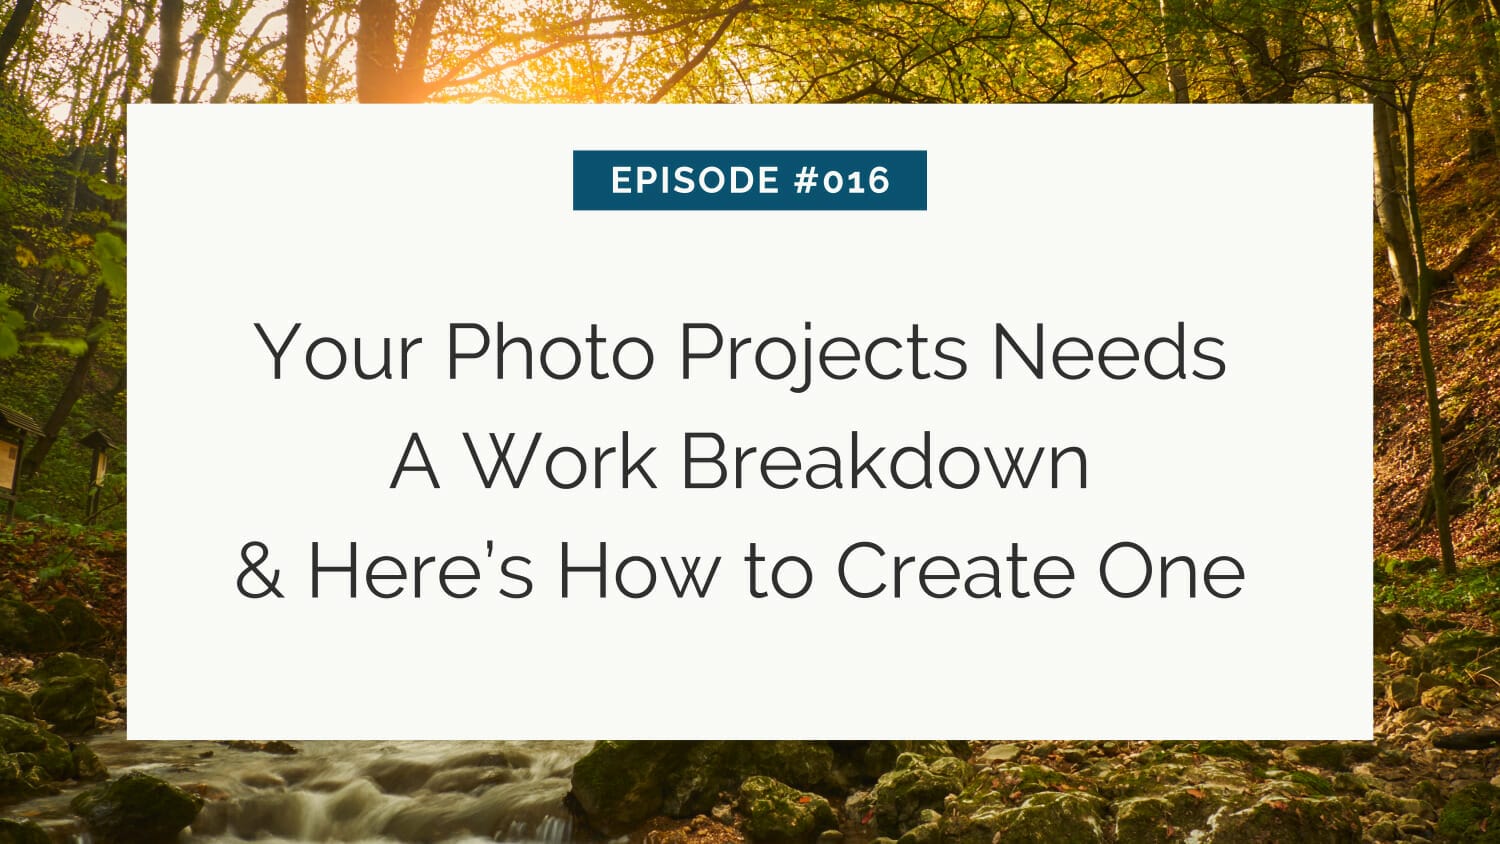 Episode #016: promotional image for a tutorial on creating a work breakdown for photo projects, set against an autumnal forest backdrop with a stream.